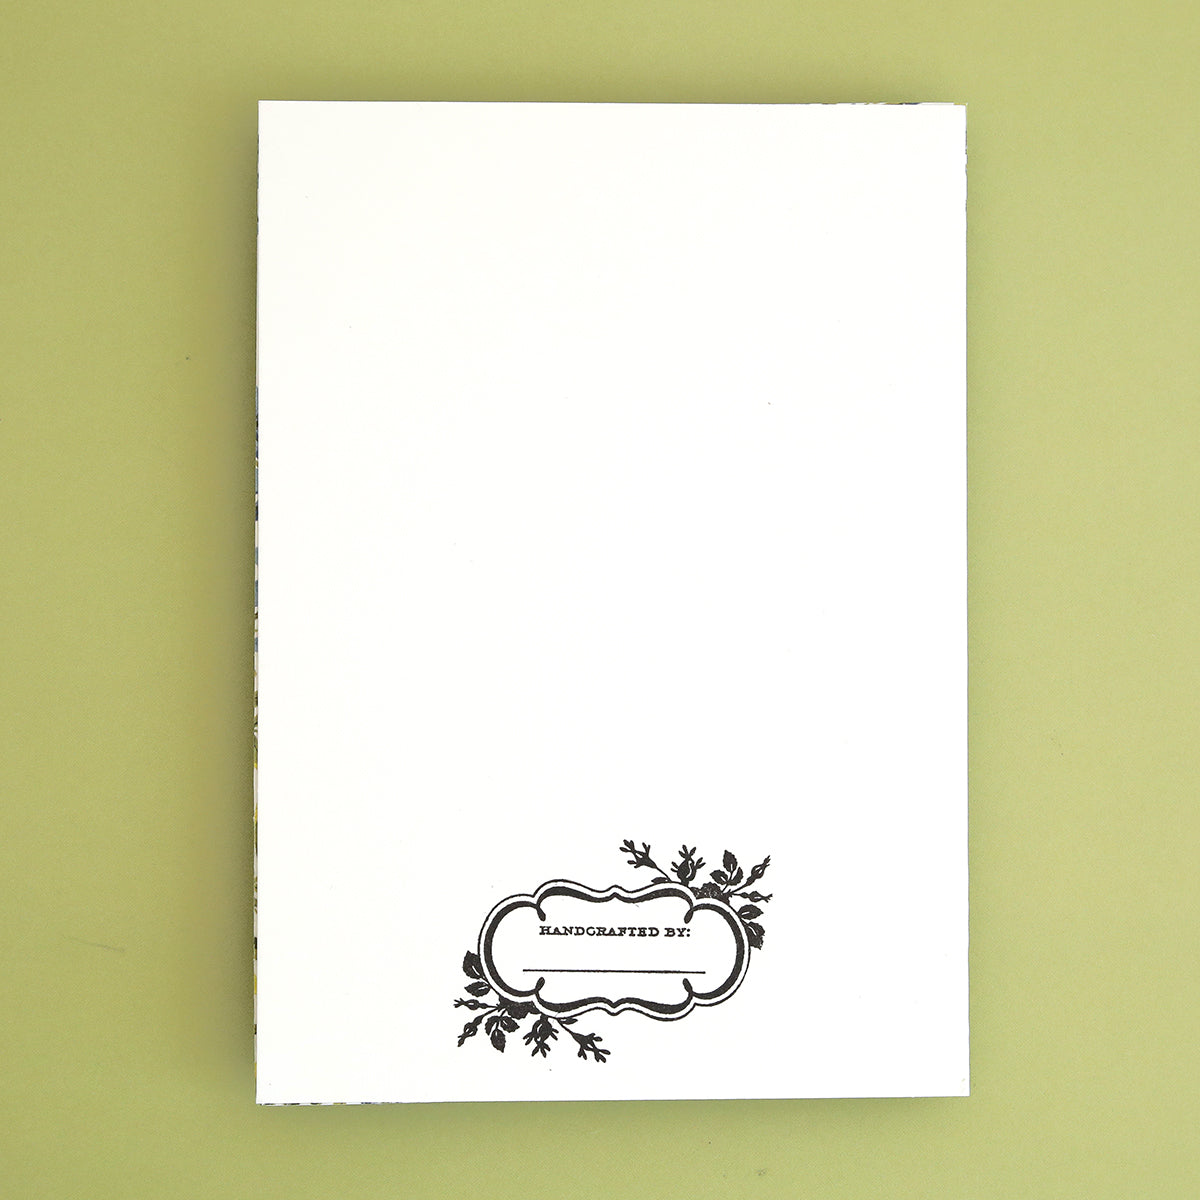 a white book with a black border on a green background.